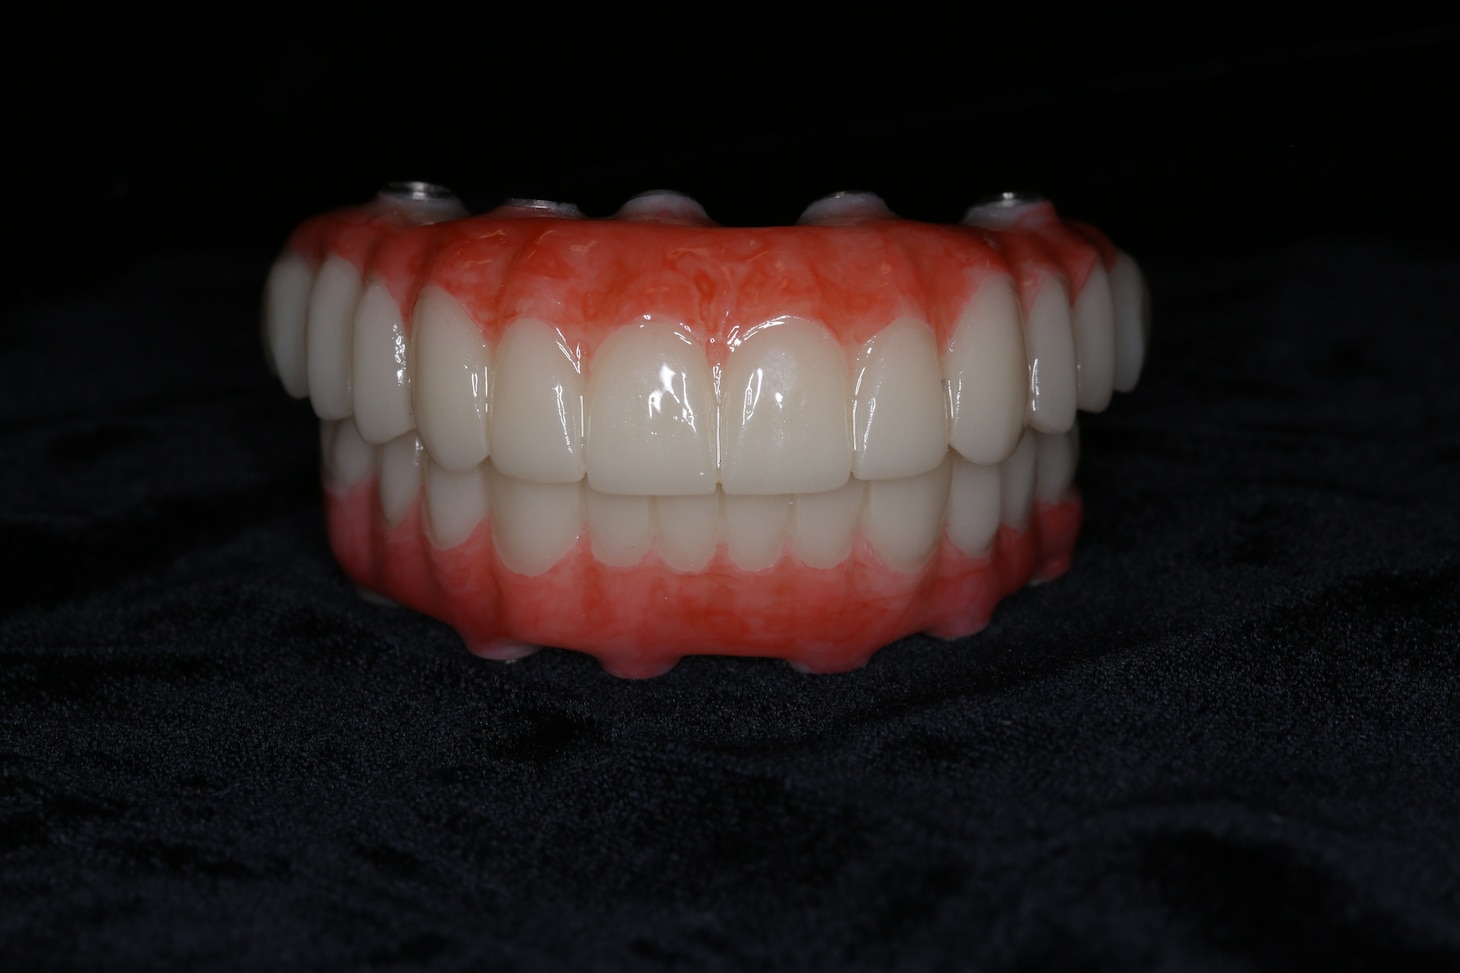 A file photo of full-arch 3D-printed teeth, similar to the ones that were implanted by Navy dentists in the two patients that underwent the “all-on-4” procedure at Naval Hospital Bremerton, Washington in April, 2022. The white part of the teeth are 3D printed, and the pink part is a hand-layered composite. (Courtesy photo/U.S. Navy)